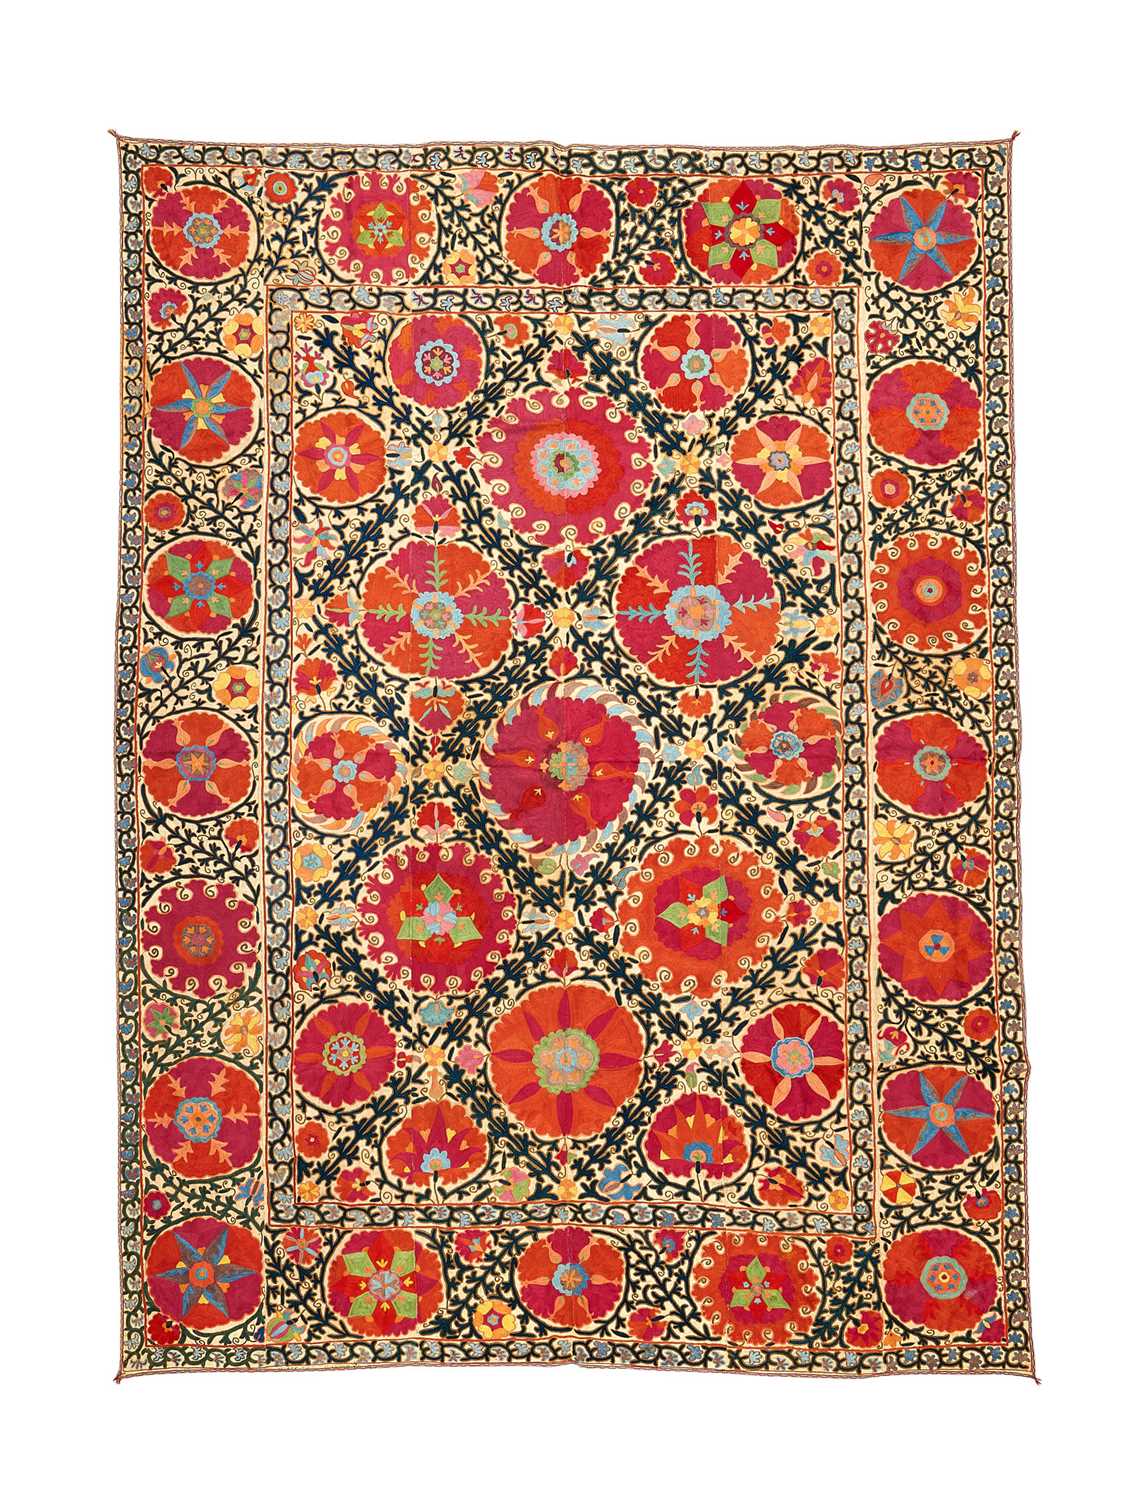 AN 18TH CENTURY EMBROIDERED SUZANI WALL HANGING TEXTILE